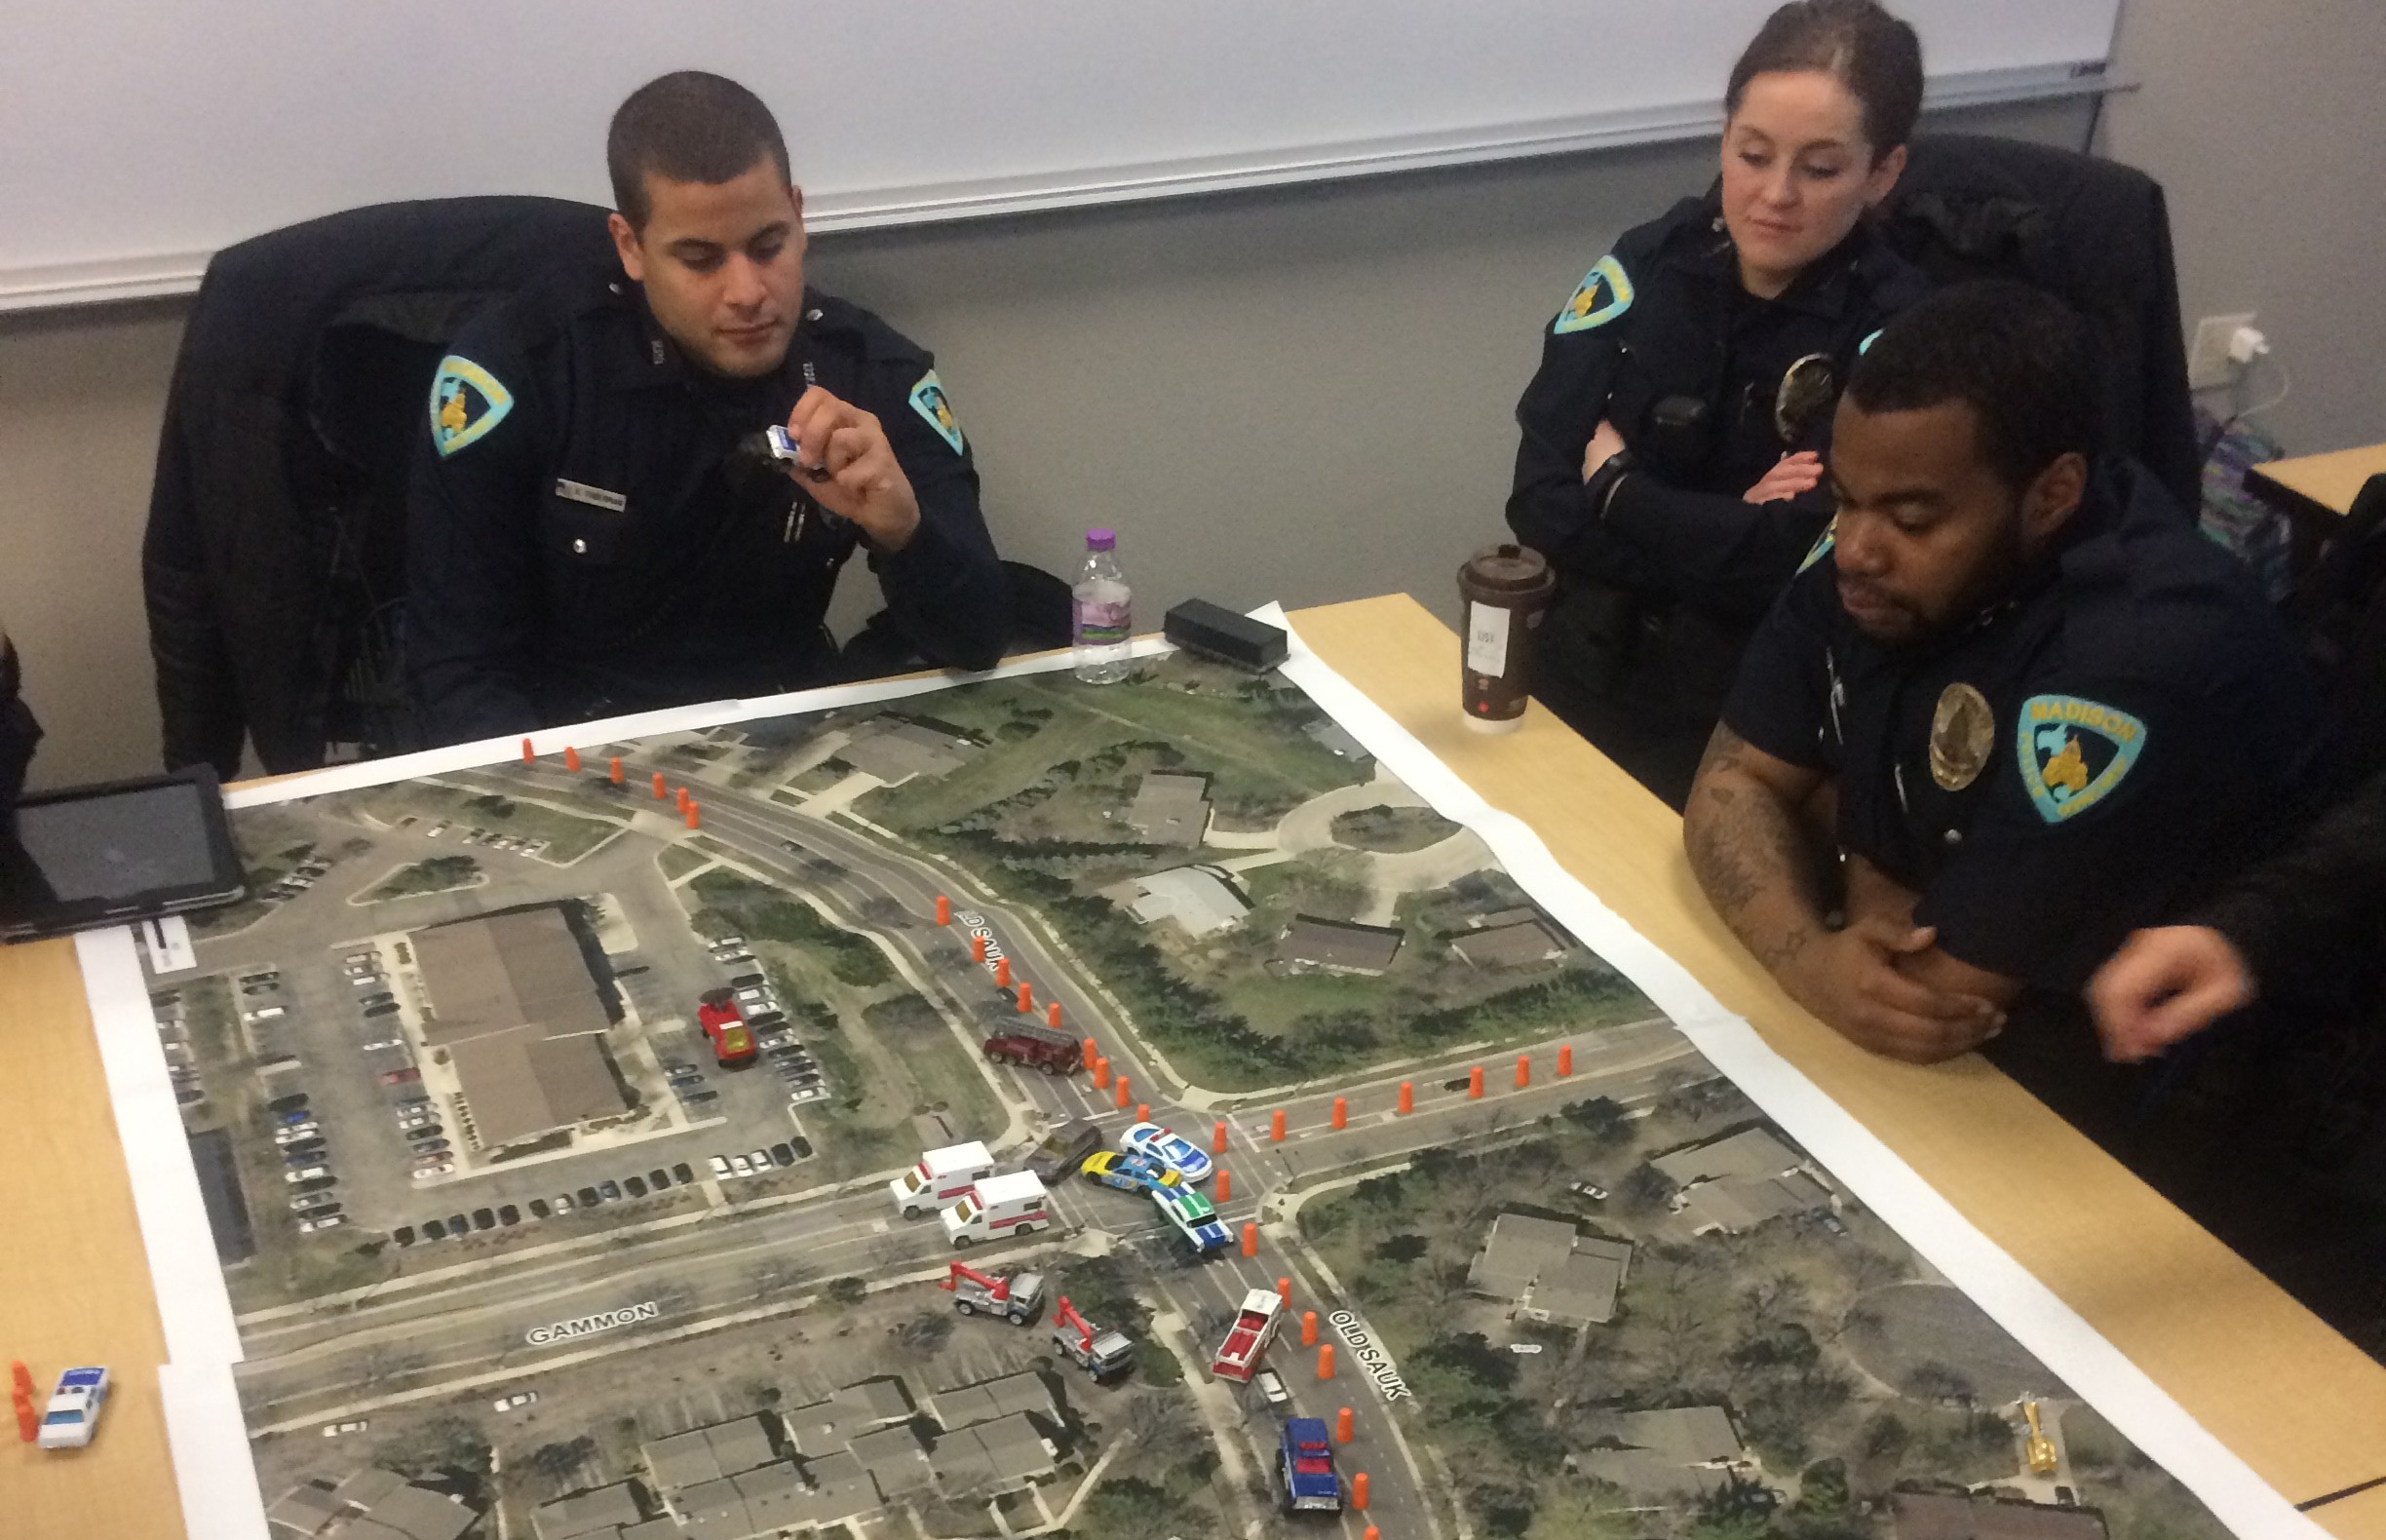 Madison Police recruits learn to stage emergency vehicles at the site of a traffic crash using a map of Madison and matchbox cars.